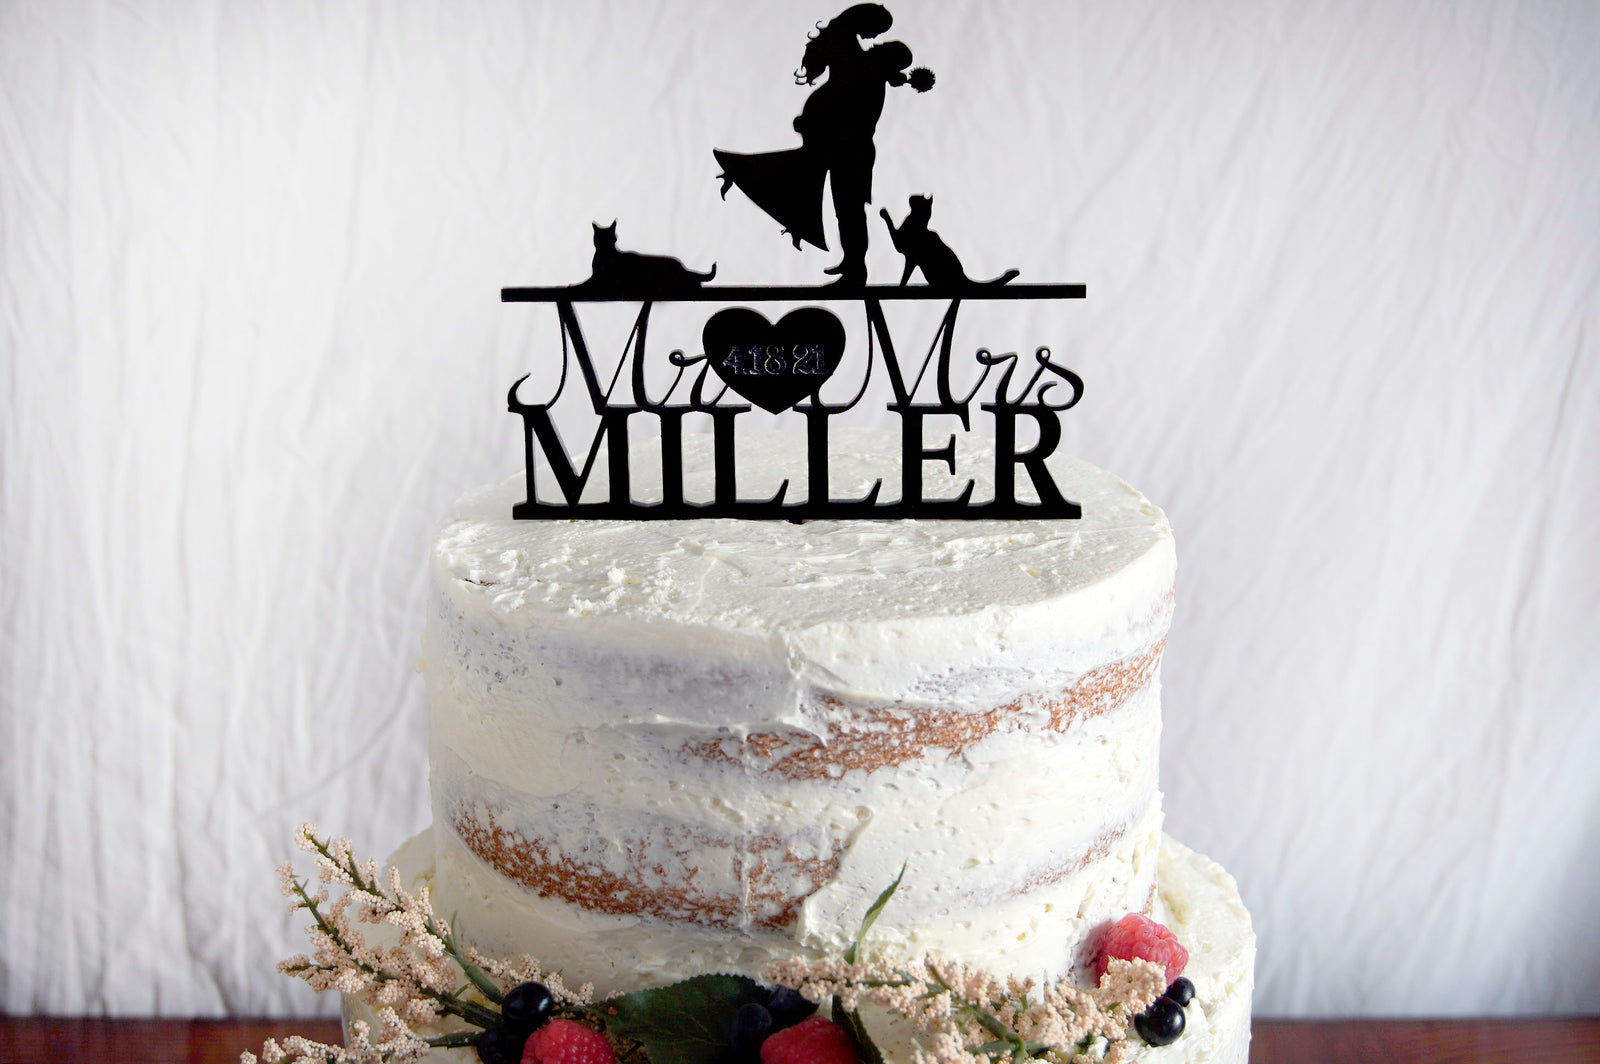 Personalized acrylic wedding cake topper with bride and groom